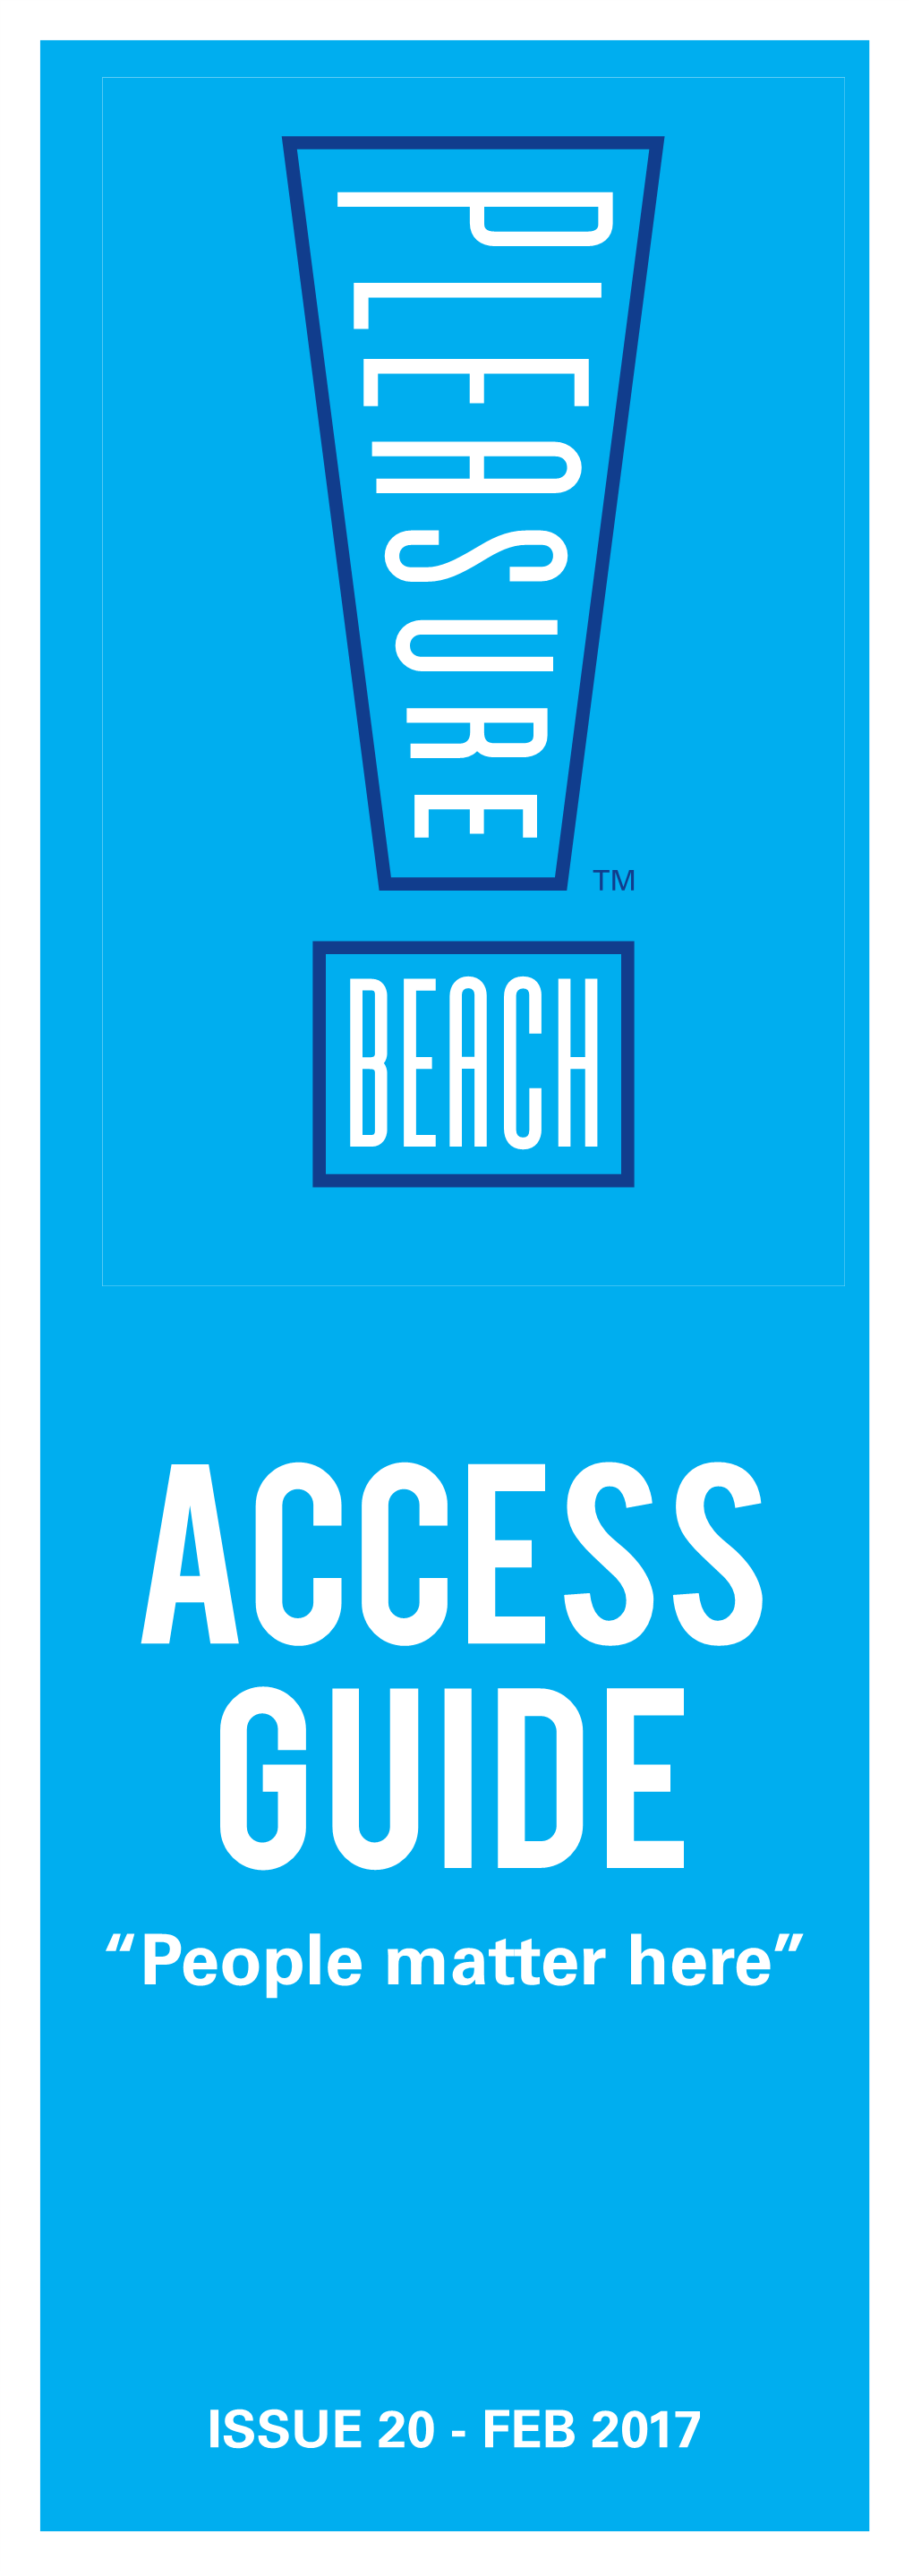 Access Guide BPB 2017-New.Qxp Test 16/03/2017 14:22 Page 1